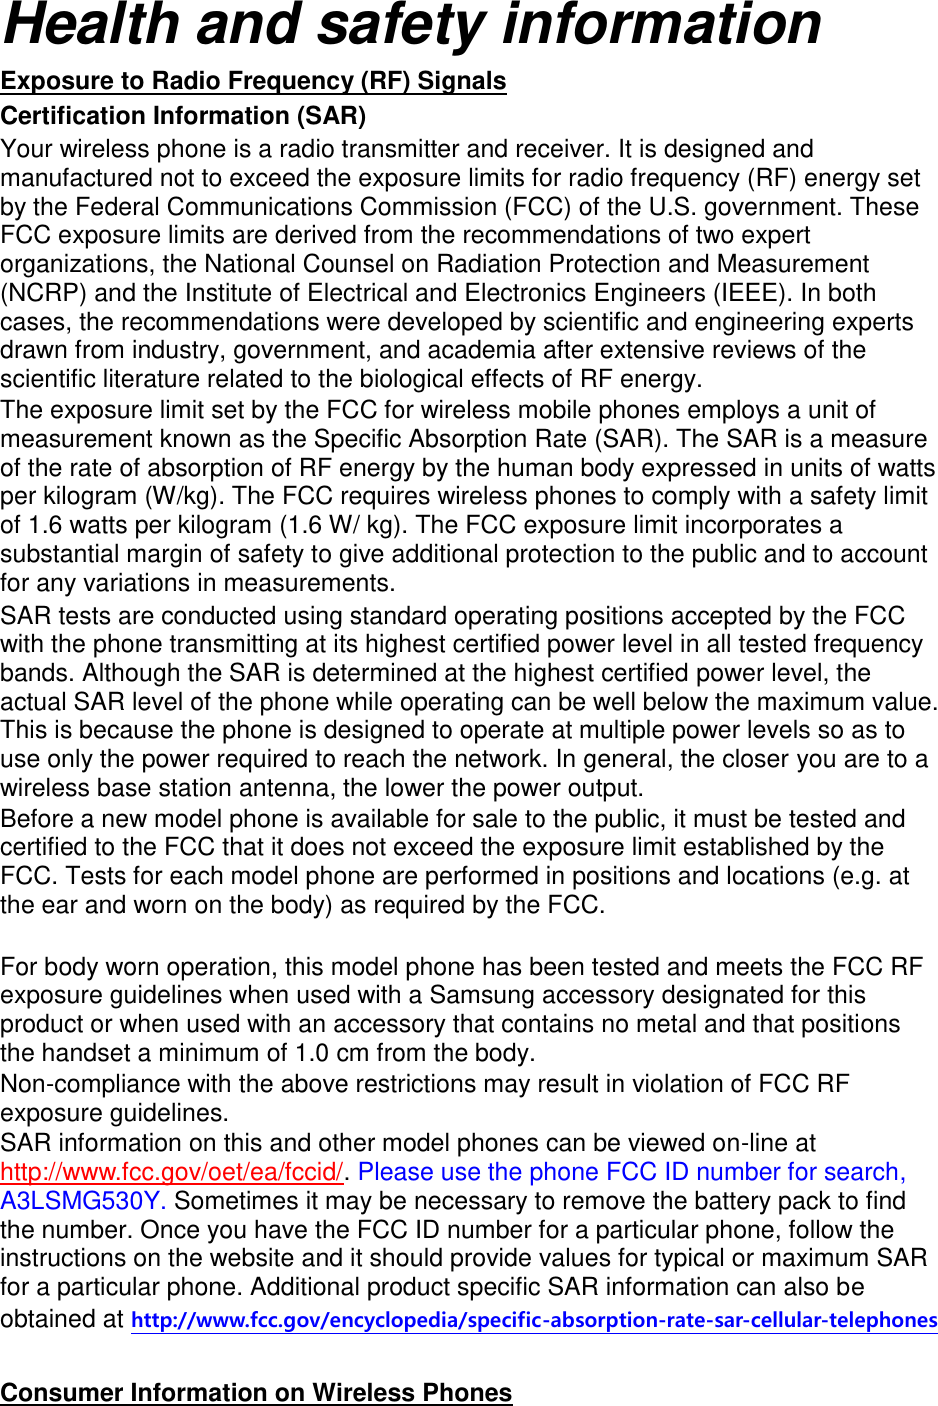 Health and safety information Exposure to Radio Frequency (RF) Signals Certification Information (SAR) Your wireless phone is a radio transmitter and receiver. It is designed and manufactured not to exceed the exposure limits for radio frequency (RF) energy set by the Federal Communications Commission (FCC) of the U.S. government. These FCC exposure limits are derived from the recommendations of two expert organizations, the National Counsel on Radiation Protection and Measurement (NCRP) and the Institute of Electrical and Electronics Engineers (IEEE). In both cases, the recommendations were developed by scientific and engineering experts drawn from industry, government, and academia after extensive reviews of the scientific literature related to the biological effects of RF energy. The exposure limit set by the FCC for wireless mobile phones employs a unit of measurement known as the Specific Absorption Rate (SAR). The SAR is a measure of the rate of absorption of RF energy by the human body expressed in units of watts per kilogram (W/kg). The FCC requires wireless phones to comply with a safety limit of 1.6 watts per kilogram (1.6 W/ kg). The FCC exposure limit incorporates a substantial margin of safety to give additional protection to the public and to account for any variations in measurements. SAR tests are conducted using standard operating positions accepted by the FCC with the phone transmitting at its highest certified power level in all tested frequency bands. Although the SAR is determined at the highest certified power level, the actual SAR level of the phone while operating can be well below the maximum value. This is because the phone is designed to operate at multiple power levels so as to use only the power required to reach the network. In general, the closer you are to a wireless base station antenna, the lower the power output. Before a new model phone is available for sale to the public, it must be tested and certified to the FCC that it does not exceed the exposure limit established by the FCC. Tests for each model phone are performed in positions and locations (e.g. at the ear and worn on the body) as required by the FCC.      For body worn operation, this model phone has been tested and meets the FCC RF exposure guidelines when used with a Samsung accessory designated for this product or when used with an accessory that contains no metal and that positions the handset a minimum of 1.0 cm from the body.   Non-compliance with the above restrictions may result in violation of FCC RF exposure guidelines. SAR information on this and other model phones can be viewed on-line at http://www.fcc.gov/oet/ea/fccid/. Please use the phone FCC ID number for search, A3LSMG530Y. Sometimes it may be necessary to remove the battery pack to find the number. Once you have the FCC ID number for a particular phone, follow the instructions on the website and it should provide values for typical or maximum SAR for a particular phone. Additional product specific SAR information can also be obtained at http://www.fcc.gov/encyclopedia/specific-absorption-rate-sar-cellular-telephones  Consumer Information on Wireless Phones 